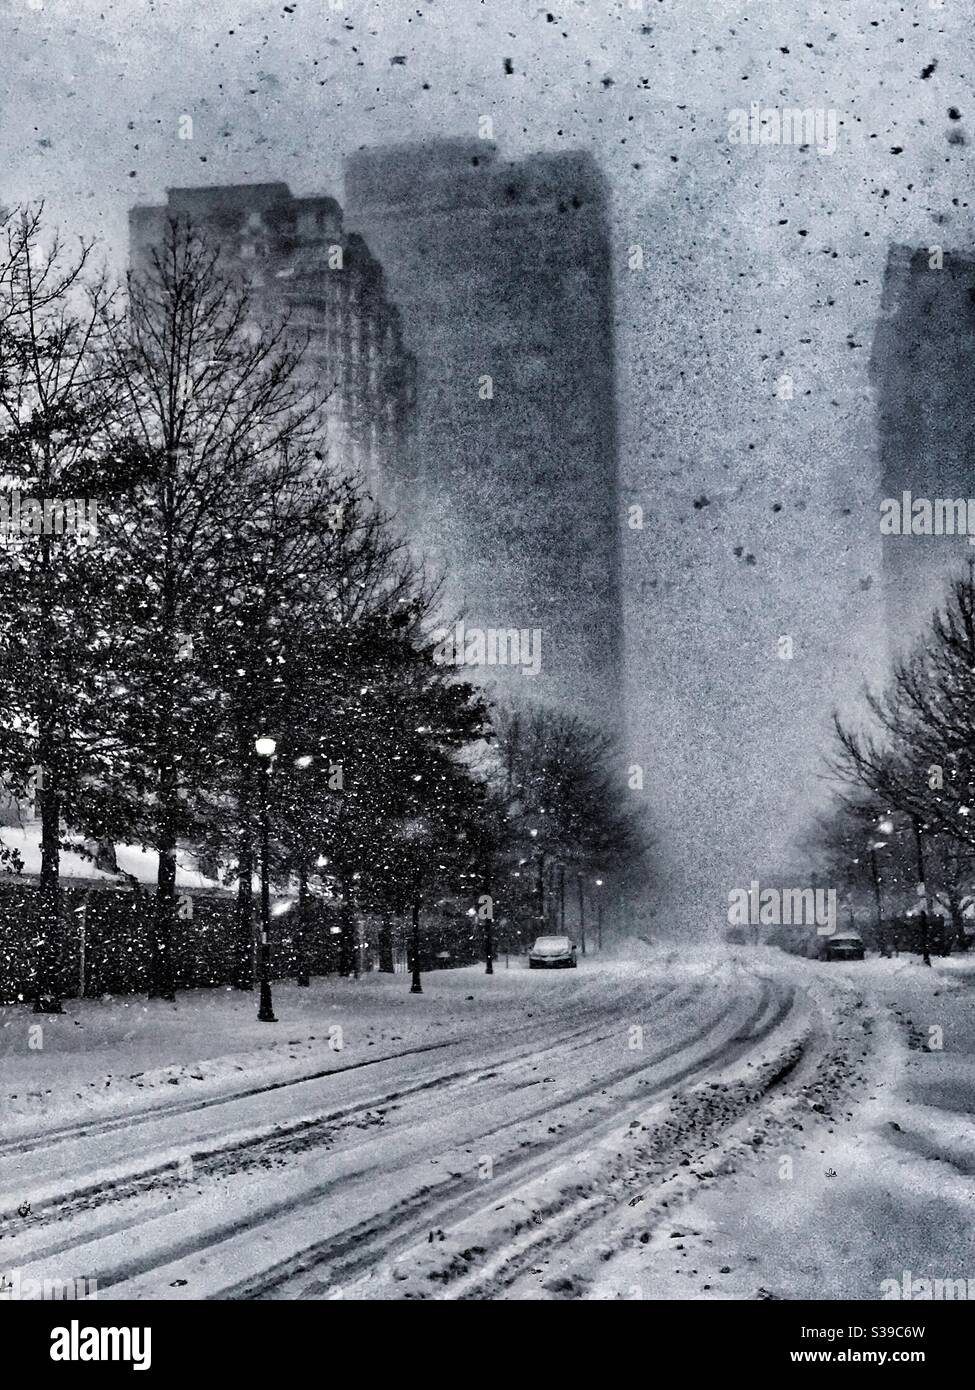 Bomb cyclone in the city Stock Photo